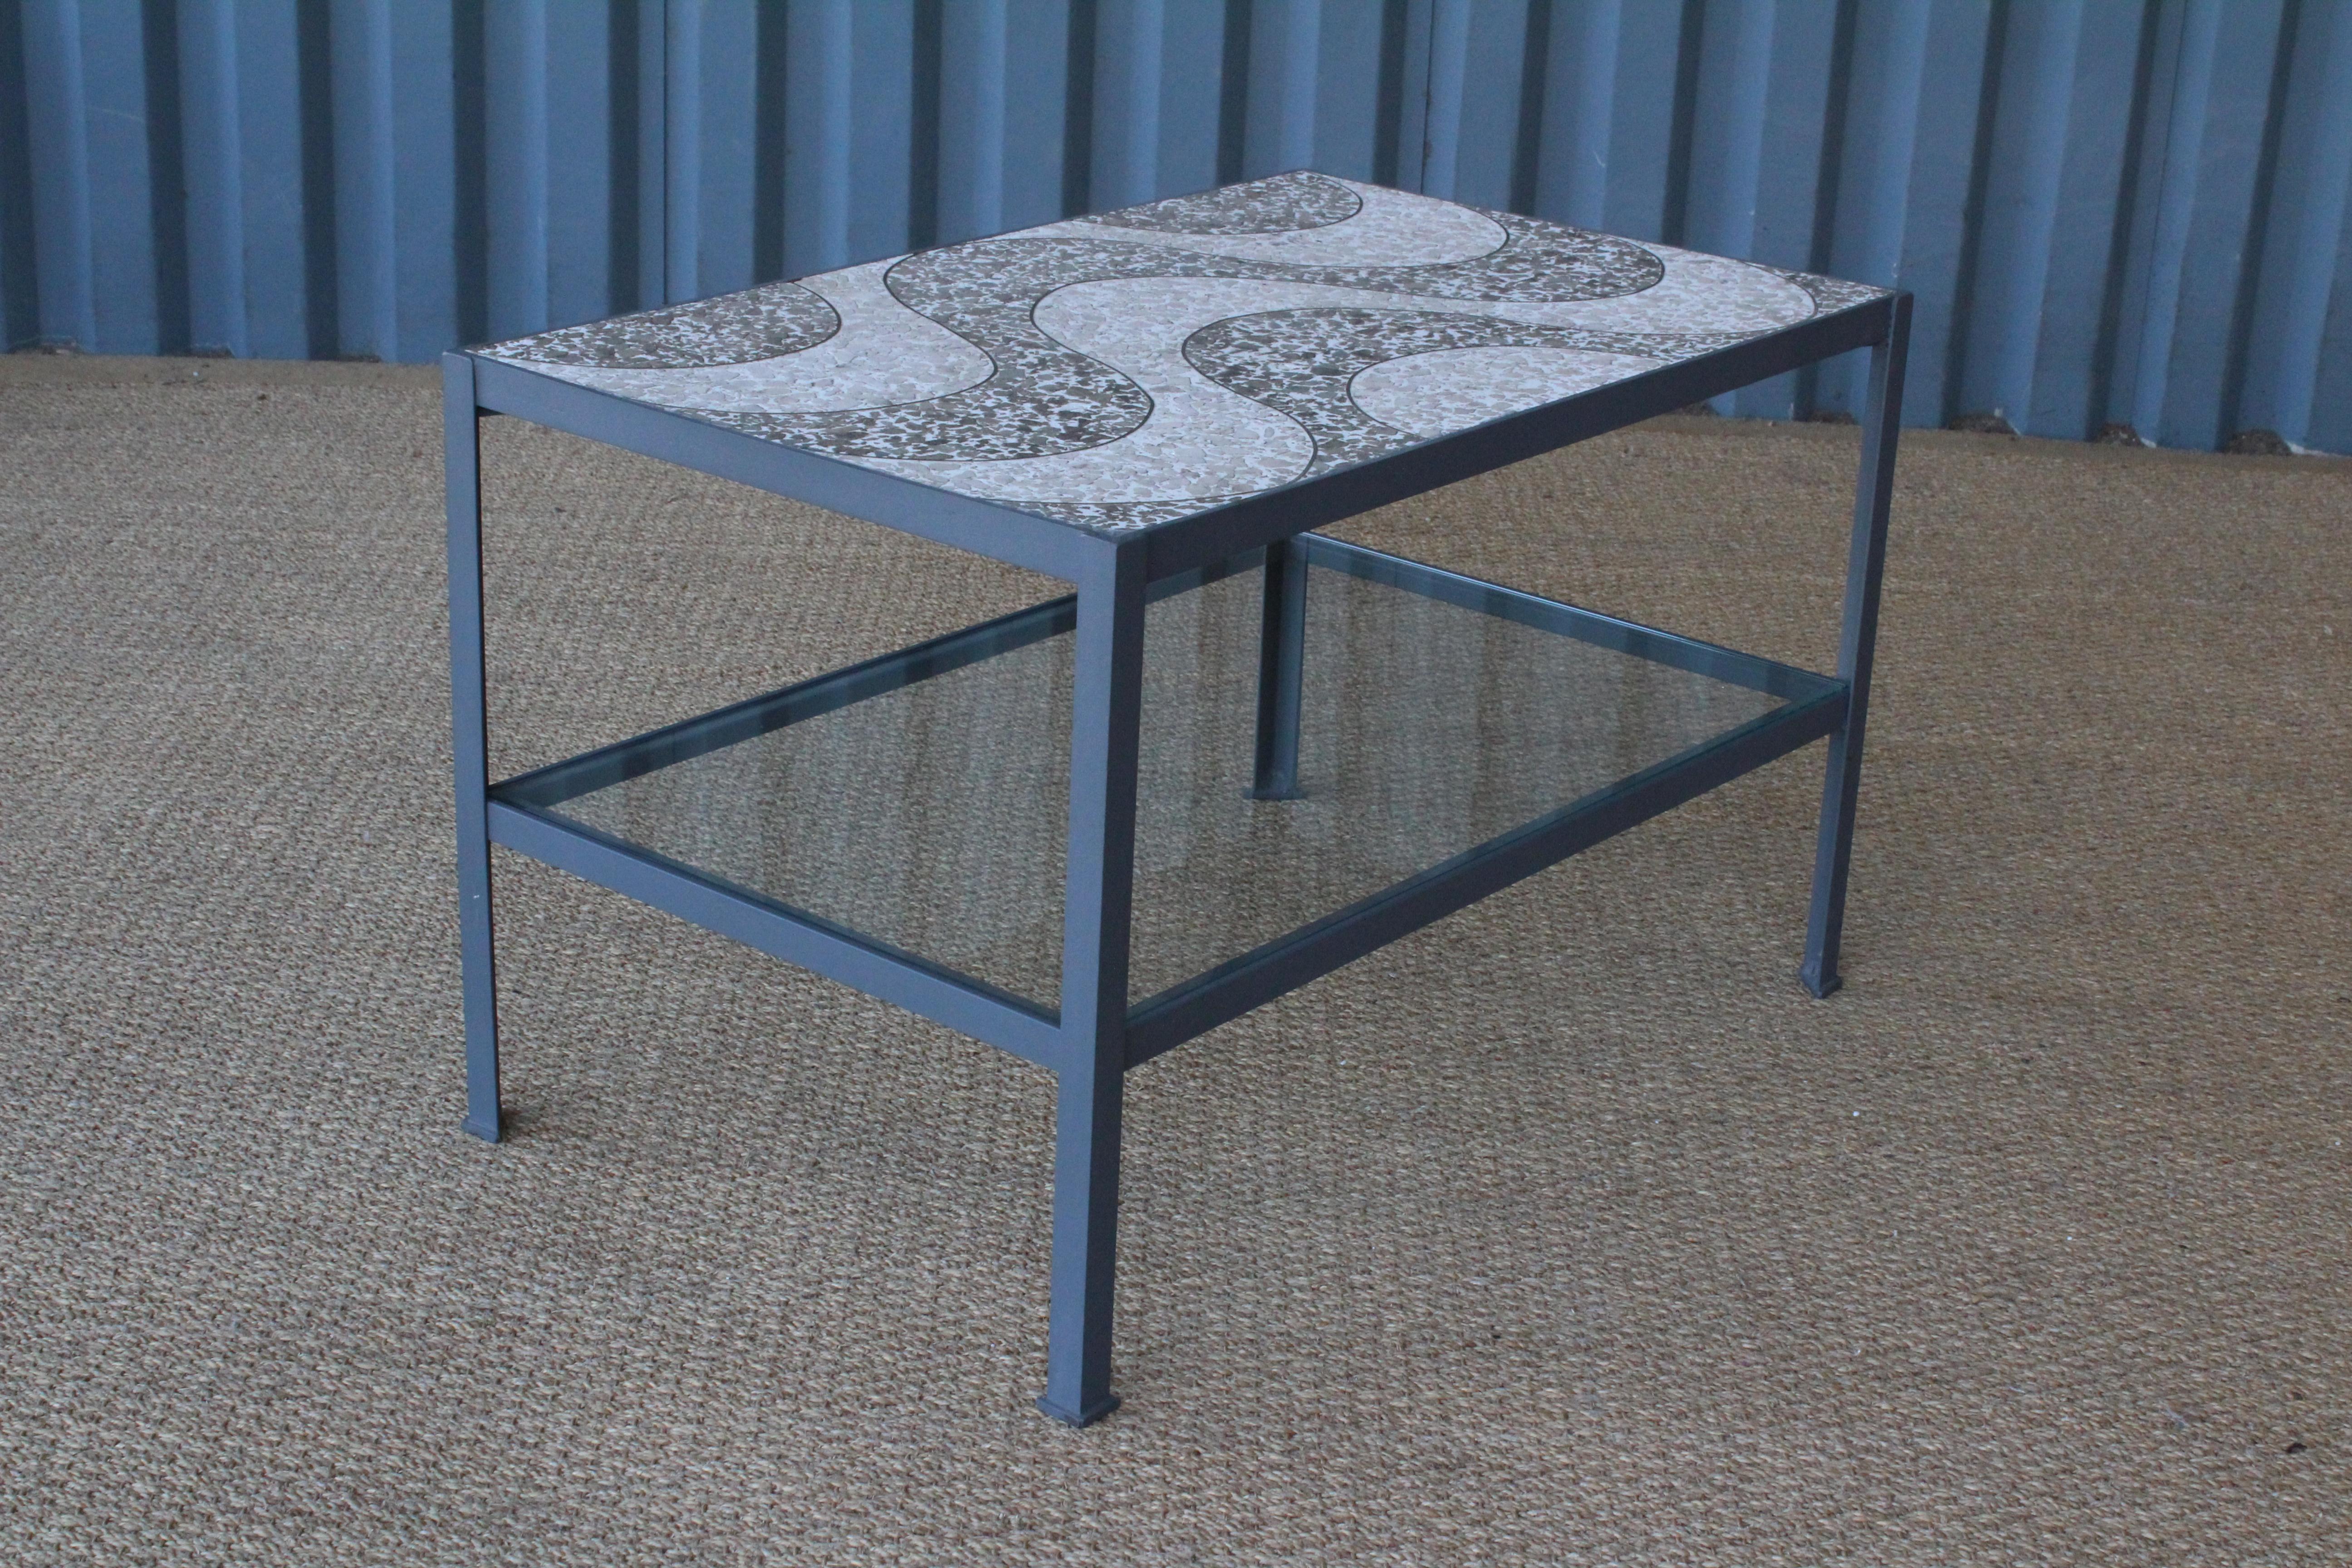 Terrazzo top end table on a grey iron base with glass shelf. Base is custom made to fit the vintage terrazzo wave patterned top.